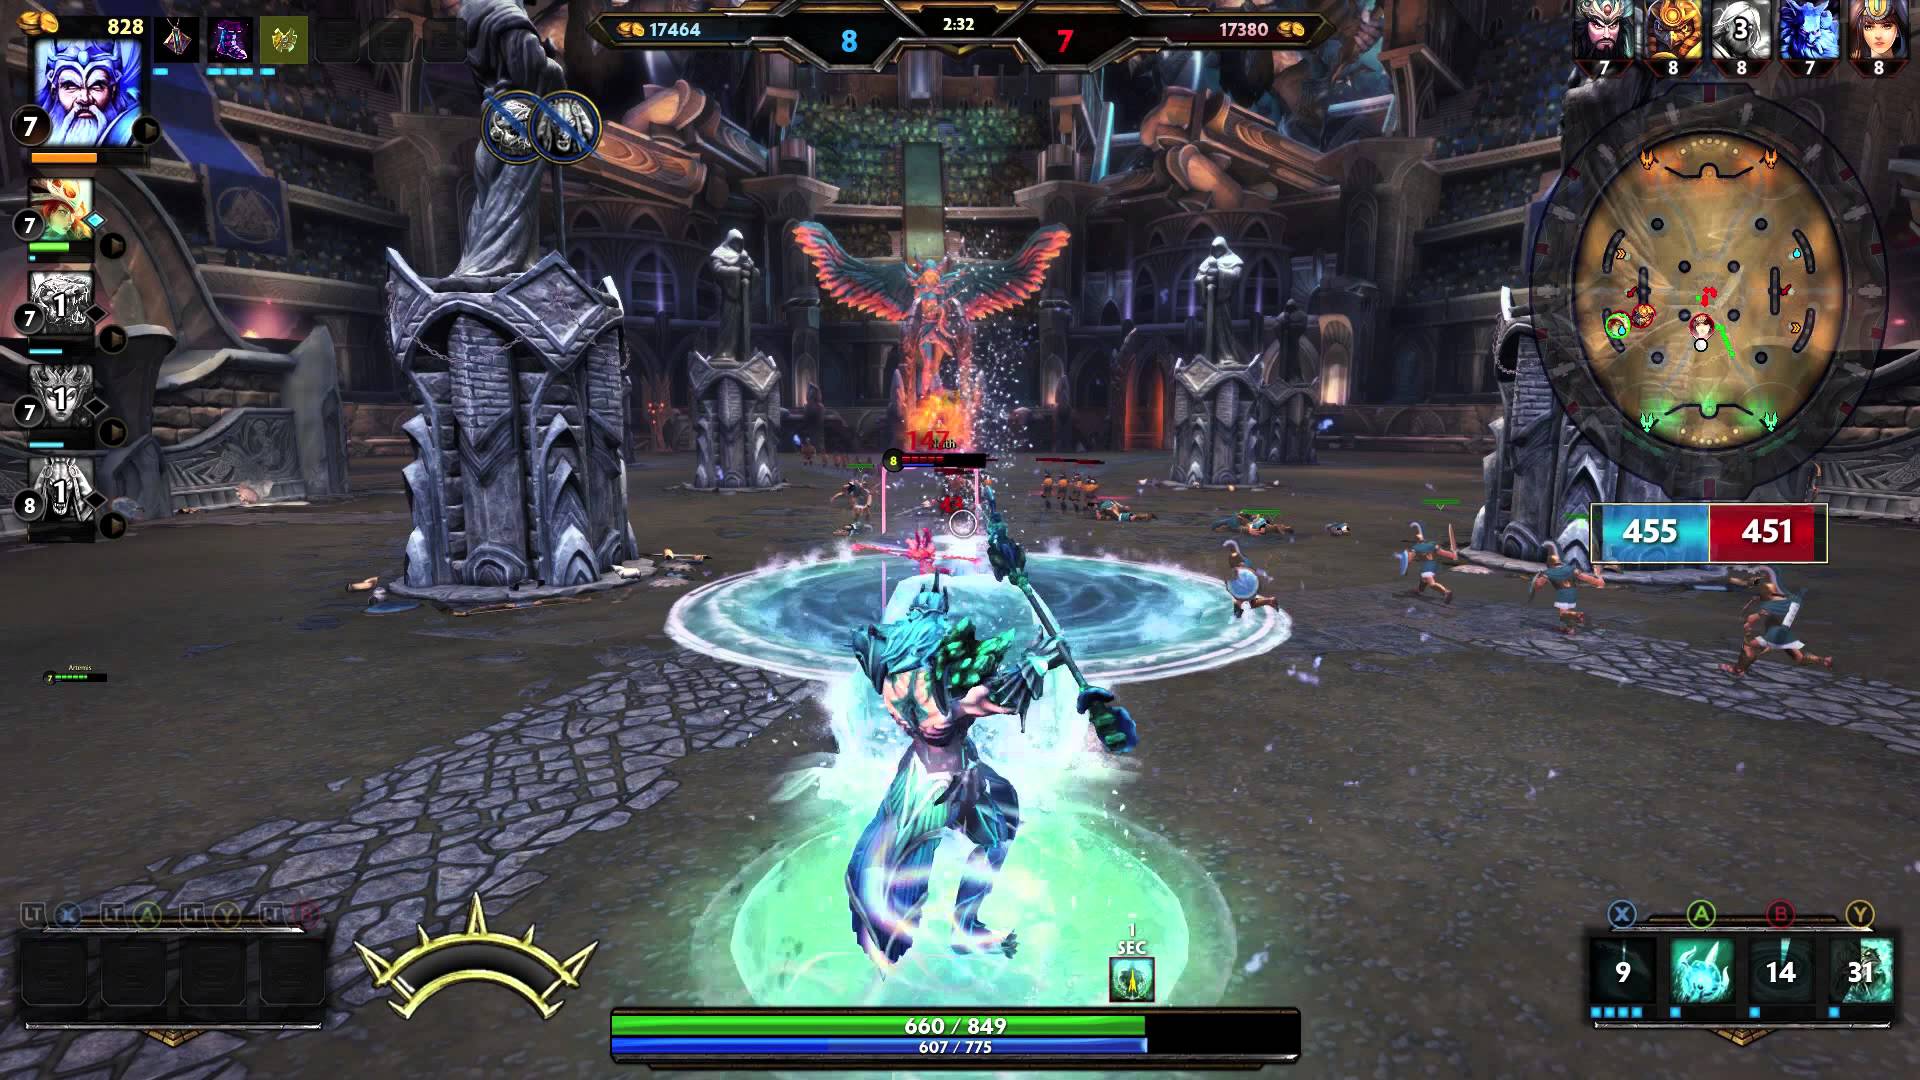 945 Blind en kop SMITE is Coming to PS4! Closed Beta Starts in March - mxdwn Games